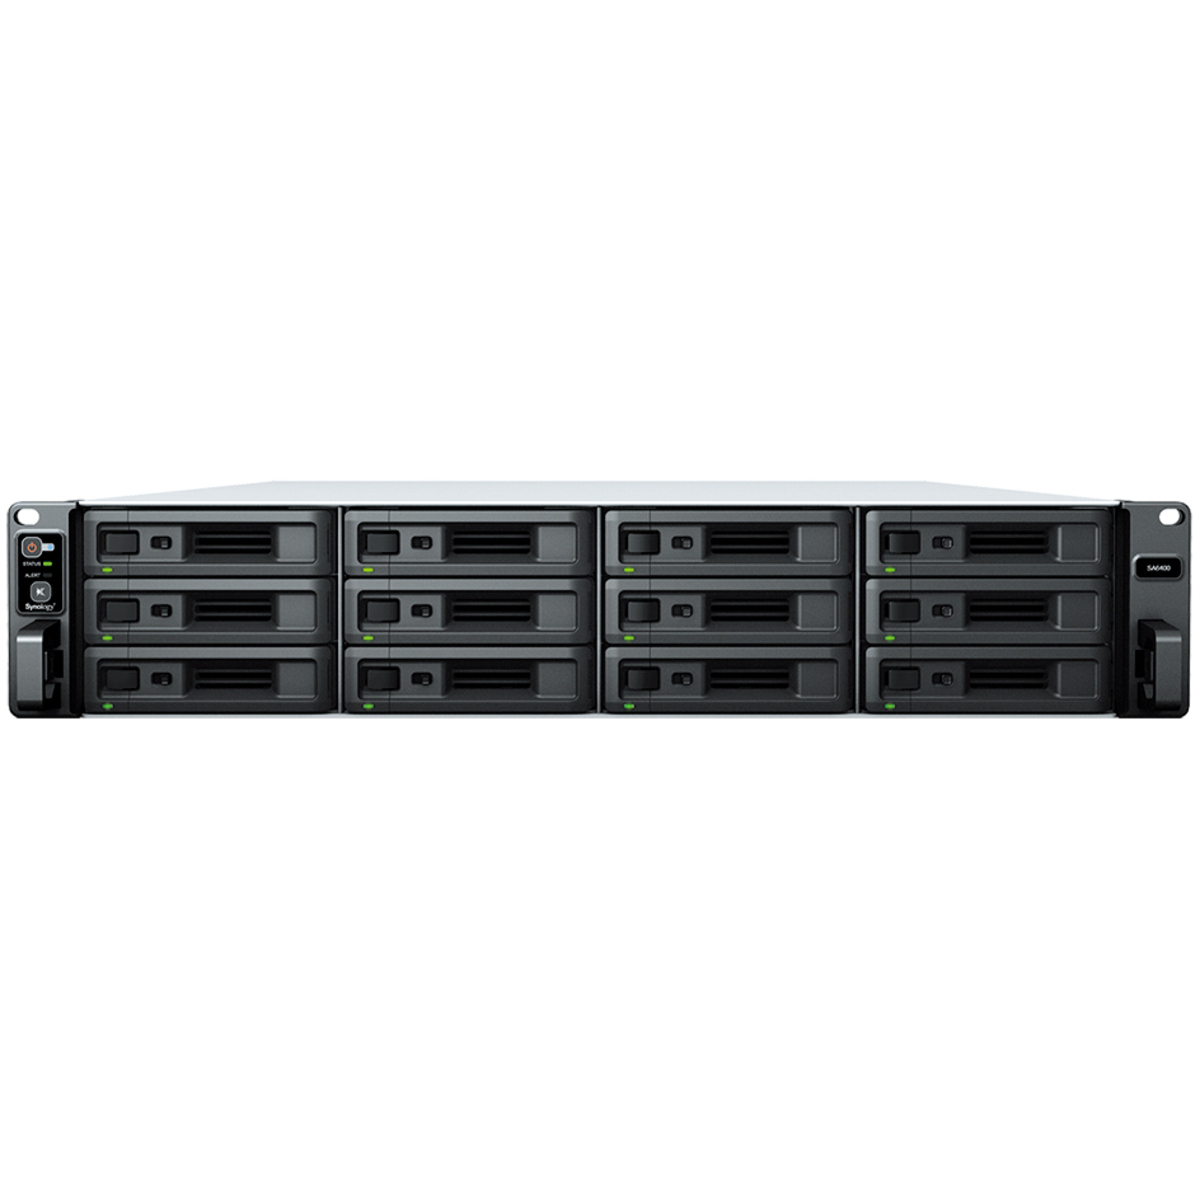 Synology RackStation SA6400 42tb 12-Bay RackMount Large Business / Enterprise NAS - Network Attached Storage Device 7x6tb Seagate IronWolf ST6000VN006 3.5 5400rpm SATA 6Gb/s HDD NAS Class Drives Installed - Burn-In Tested RackStation SA6400